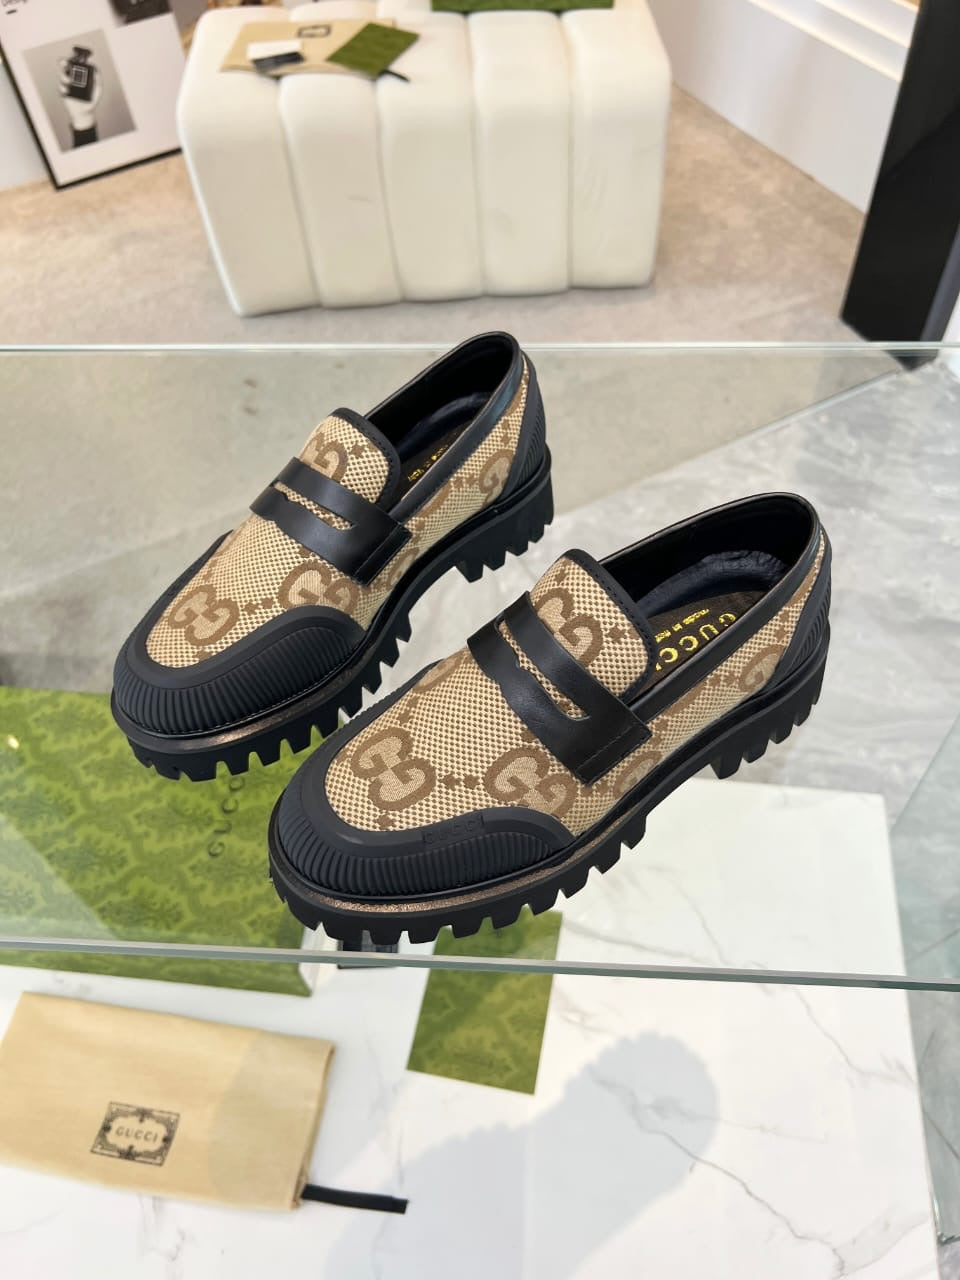 Gucci  Men's loafers Shoes.